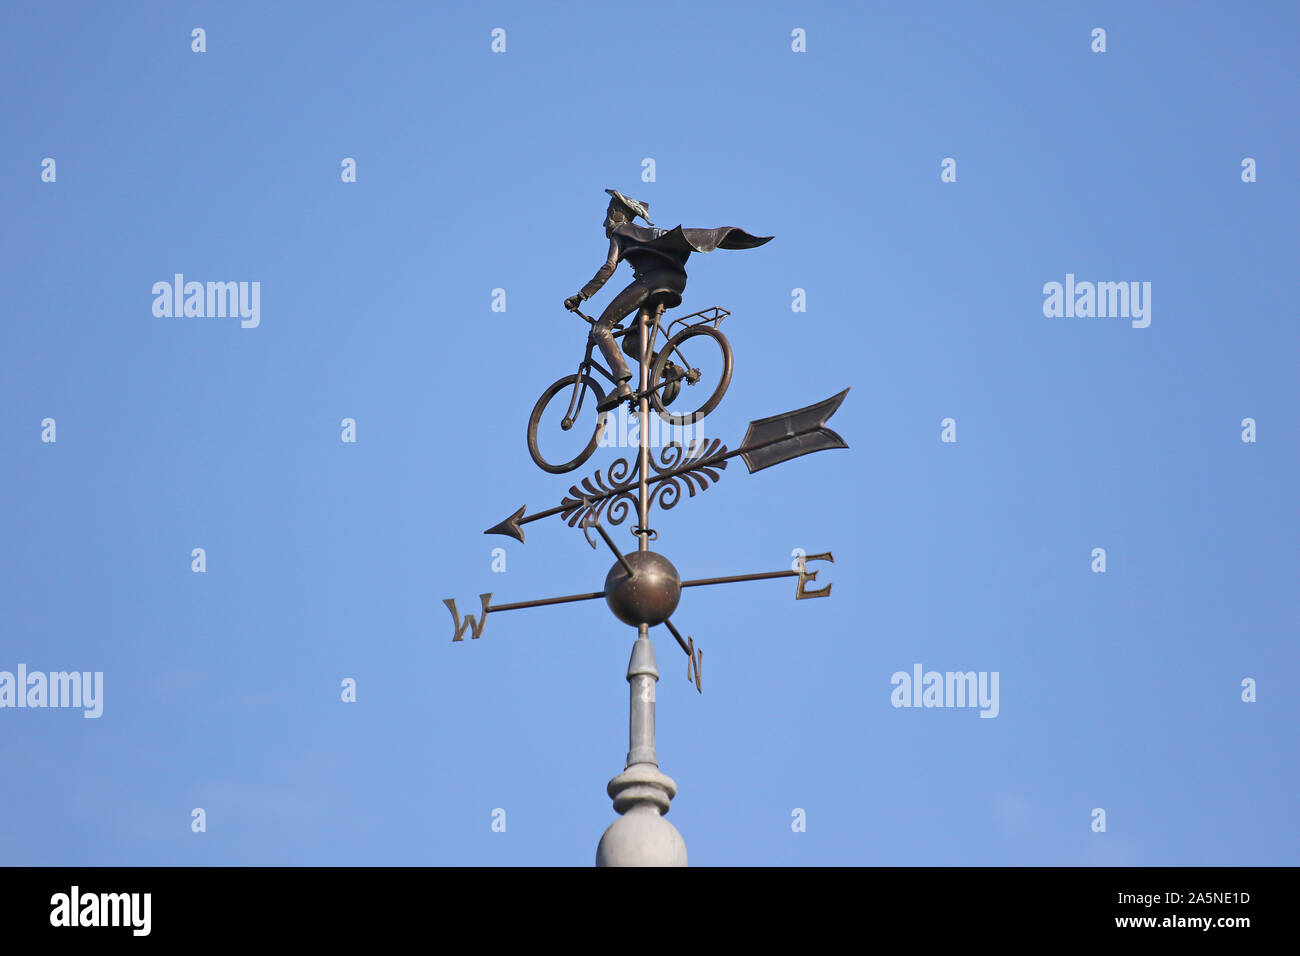 contemporary weather vane part of Harris Manchester college called the Siew-Sngiem clock tower designed by Yiangou Architects 2014 in classical style Stock Photo